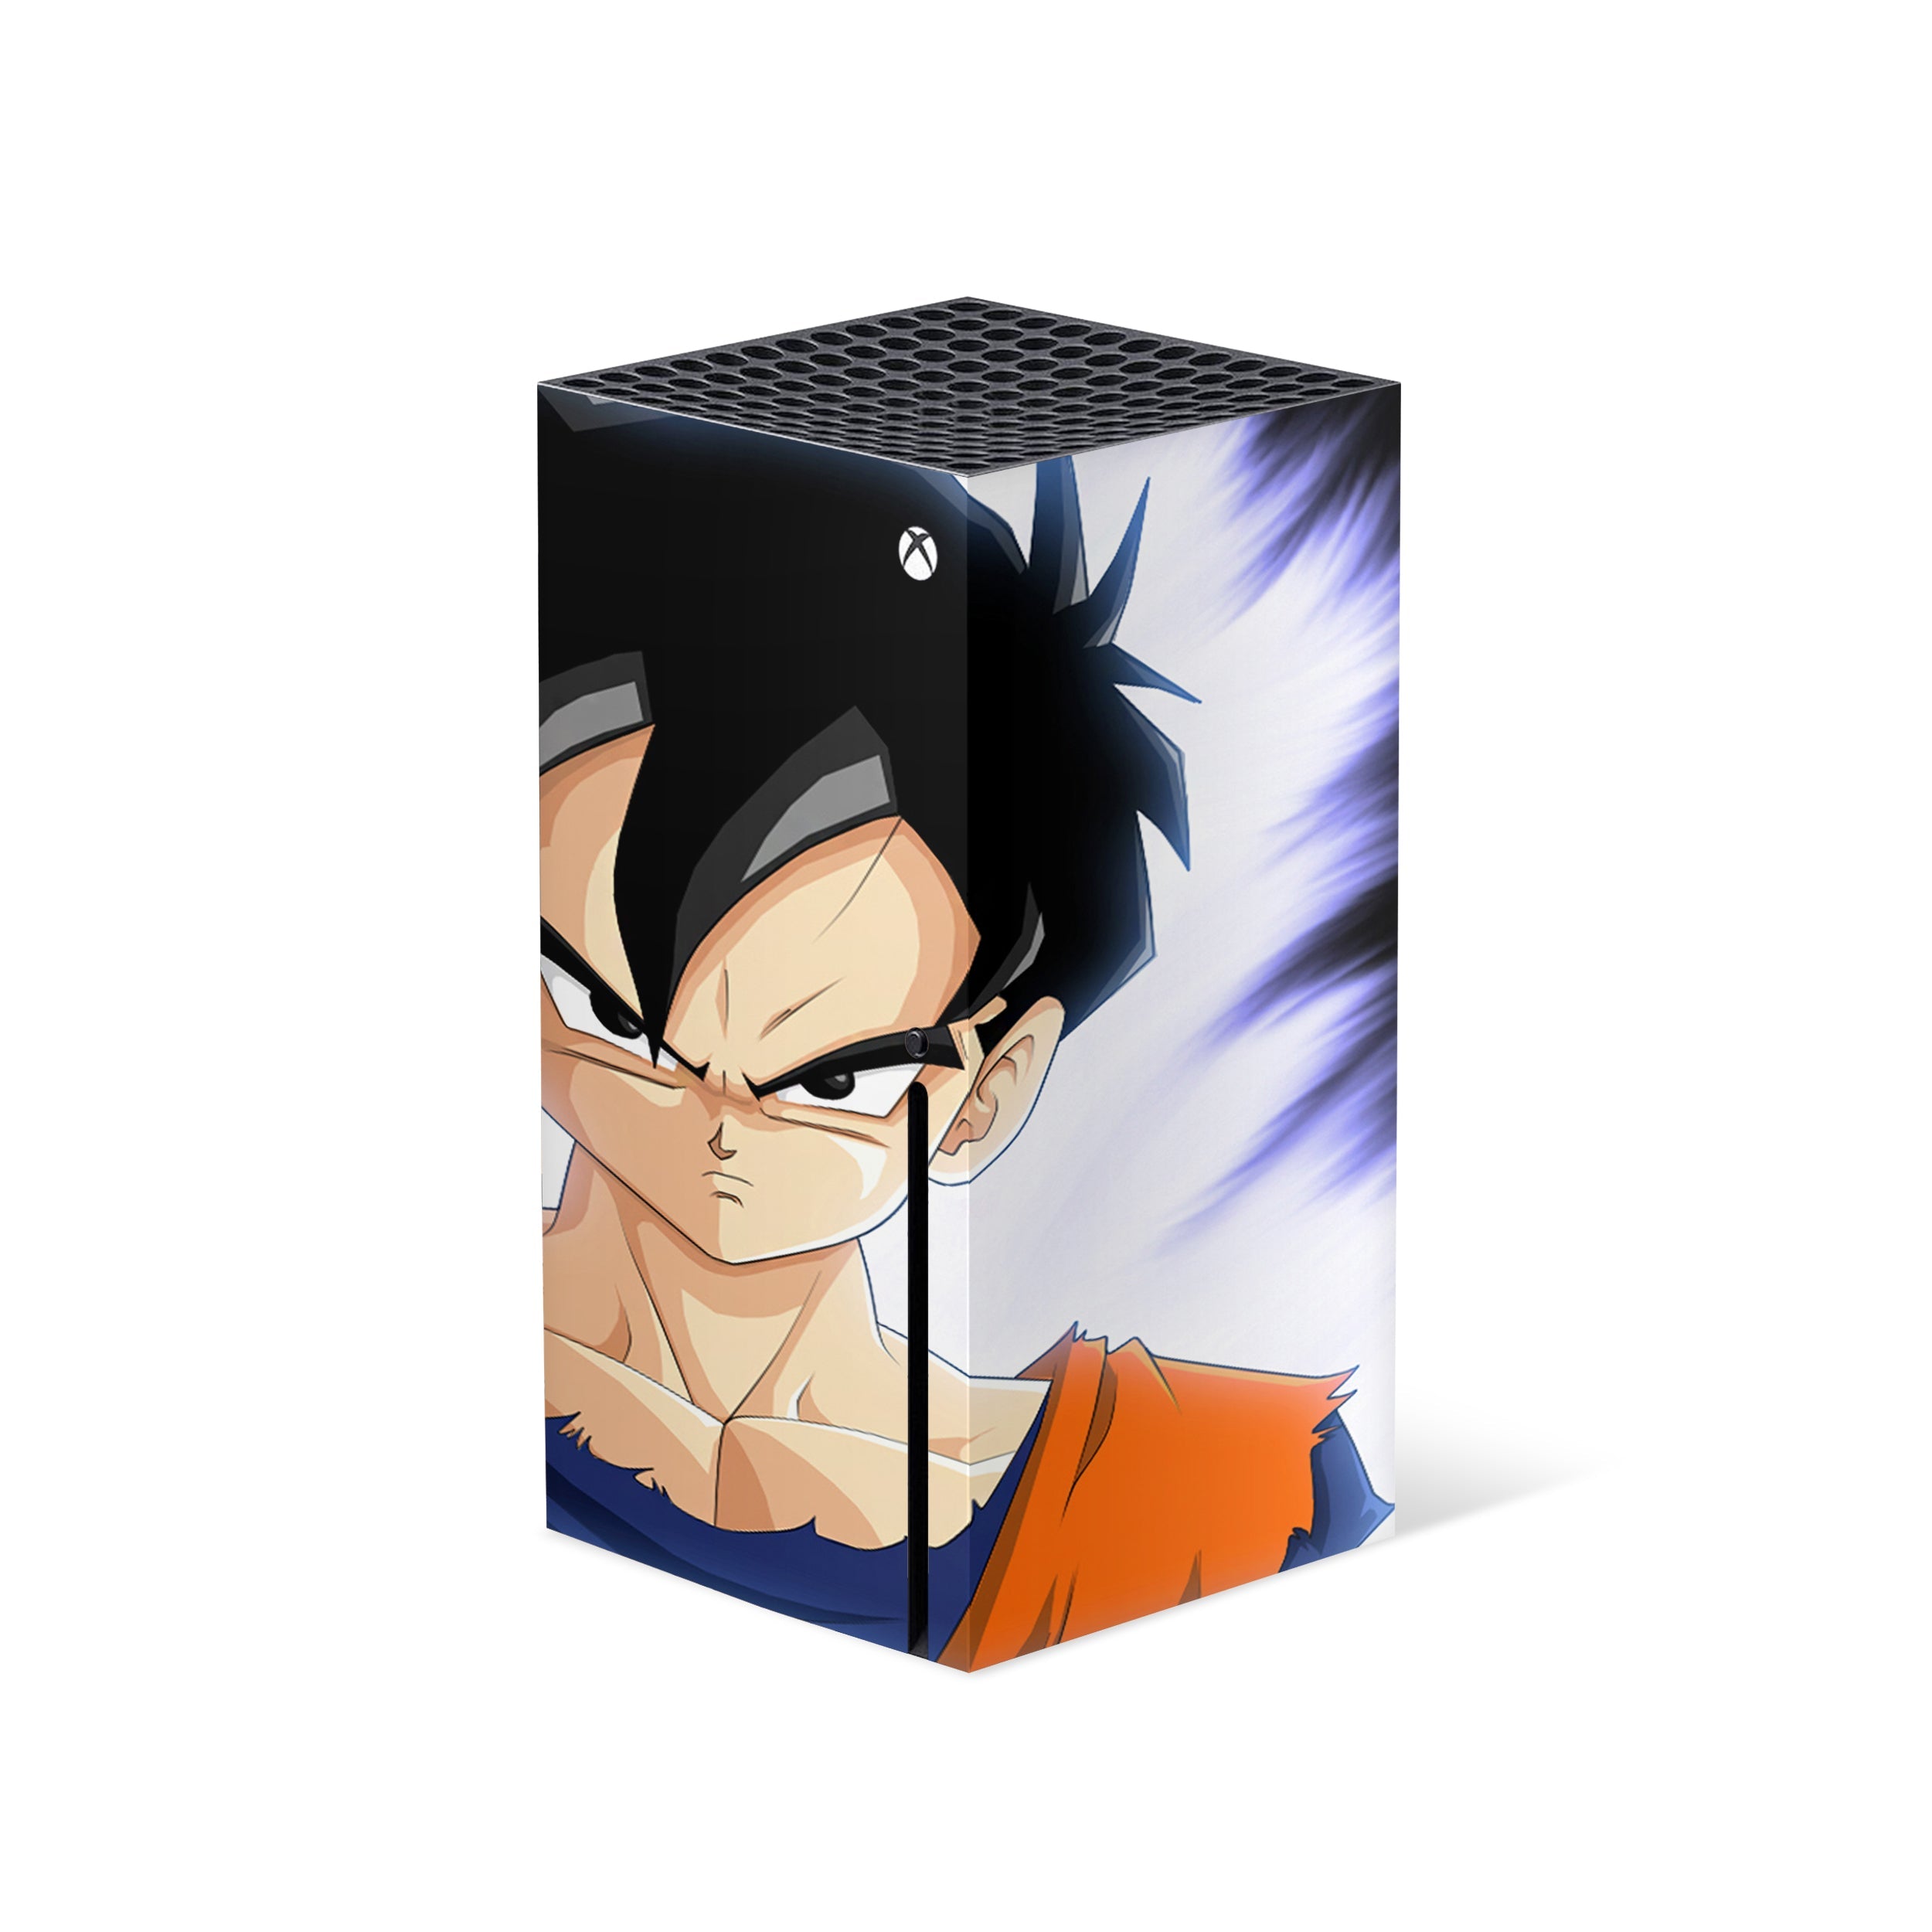 A video game skin featuring a Dragon Ball Z Gohan design for the Xbox Series X.